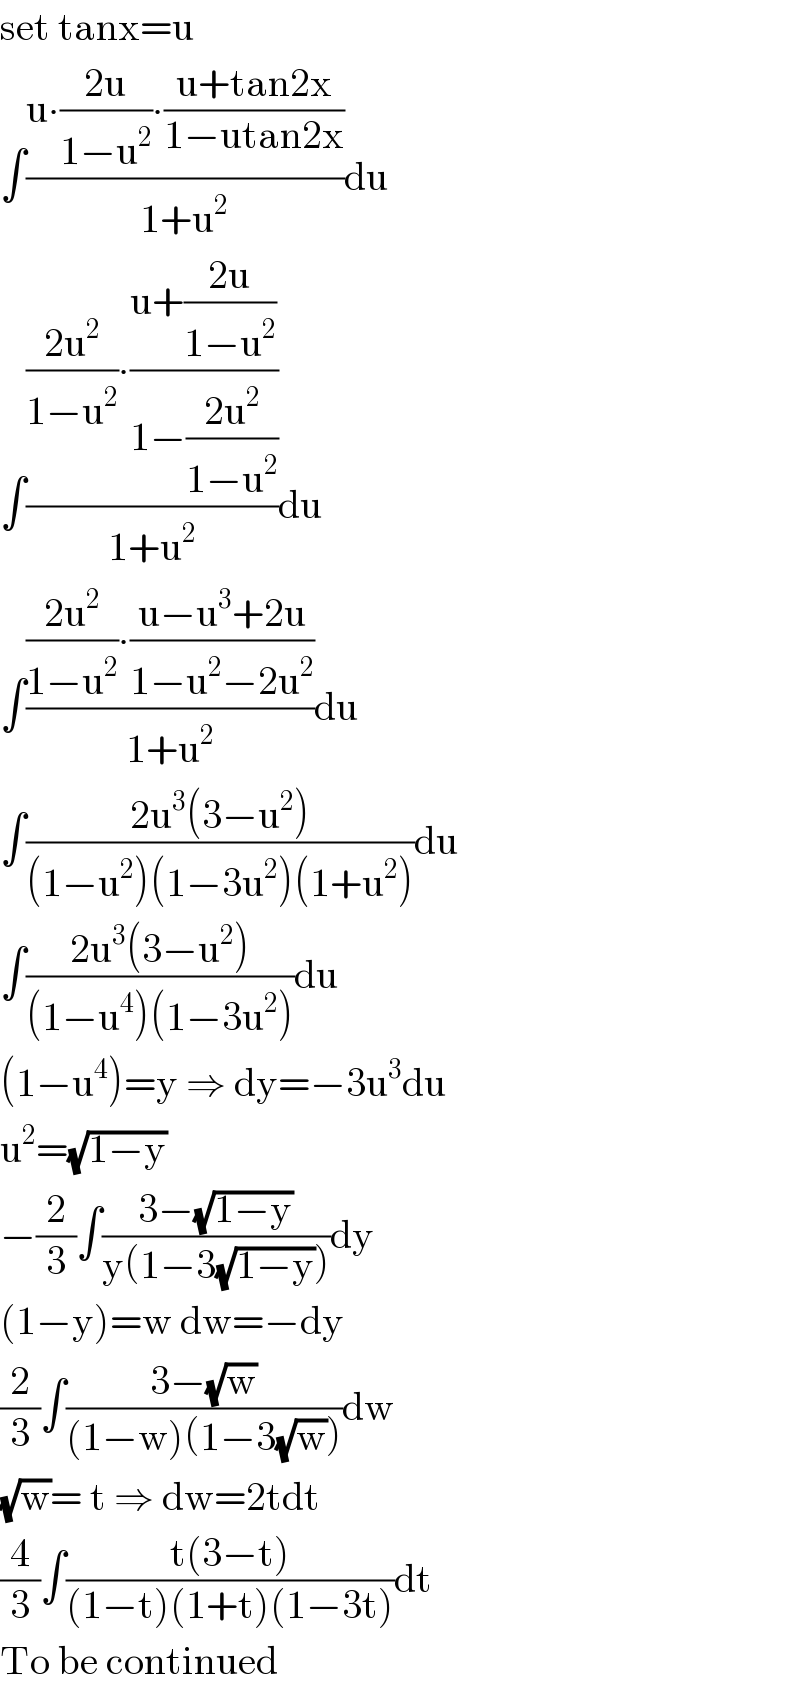 set tanx=u  ∫((u∙((2u)/(1−u^2 ))∙((u+tan2x)/(1−utan2x)))/(1+u^2 ))du  ∫((((2u^2 )/(1−u^2 ))∙((u+((2u)/(1−u^2 )))/(1−((2u^2 )/(1−u^2 )))))/(1+u^2 ))du  ∫((((2u^2 )/(1−u^2 ))∙((u−u^3 +2u)/(1−u^2 −2u^2 )))/(1+u^2 ))du  ∫((2u^3 (3−u^2 ))/((1−u^2 )(1−3u^2 )(1+u^2 )))du  ∫((2u^3 (3−u^2 ))/((1−u^4 )(1−3u^2 )))du  (1−u^4 )=y ⇒ dy=−3u^3 du  u^2 =(√(1−y))  −(2/3)∫((3−(√(1−y)))/(y(1−3(√(1−y)))))dy  (1−y)=w dw=−dy  (2/3)∫((3−(√w))/((1−w)(1−3(√w))))dw  (√w)= t ⇒ dw=2tdt  (4/3)∫((t(3−t))/((1−t)(1+t)(1−3t)))dt  To be continued  